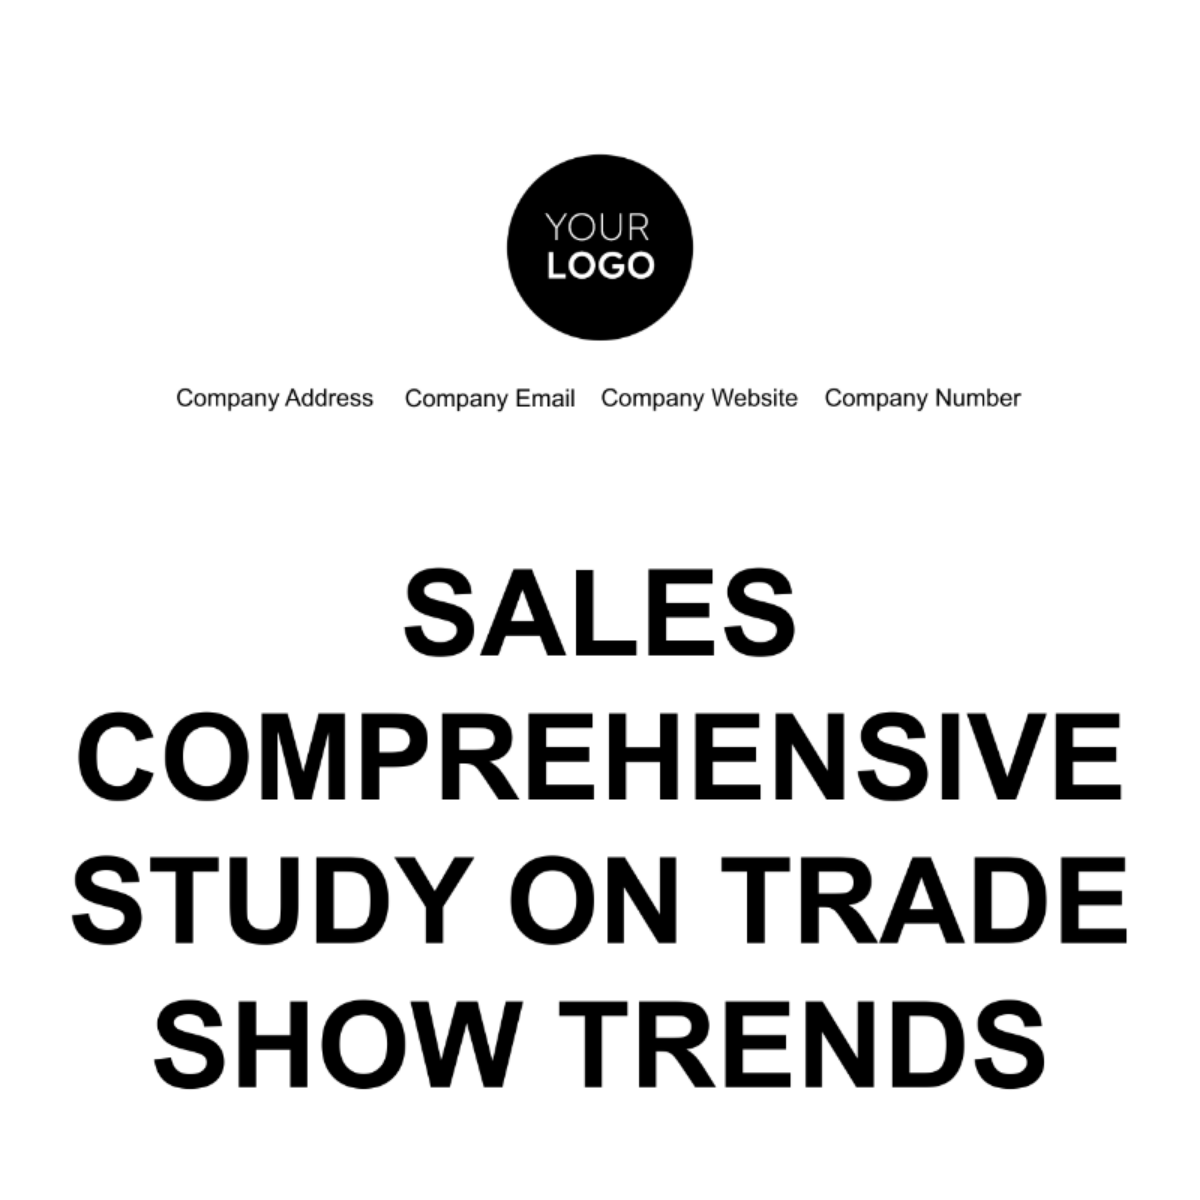 Sales Comprehensive Study on Trade Show Trends Template